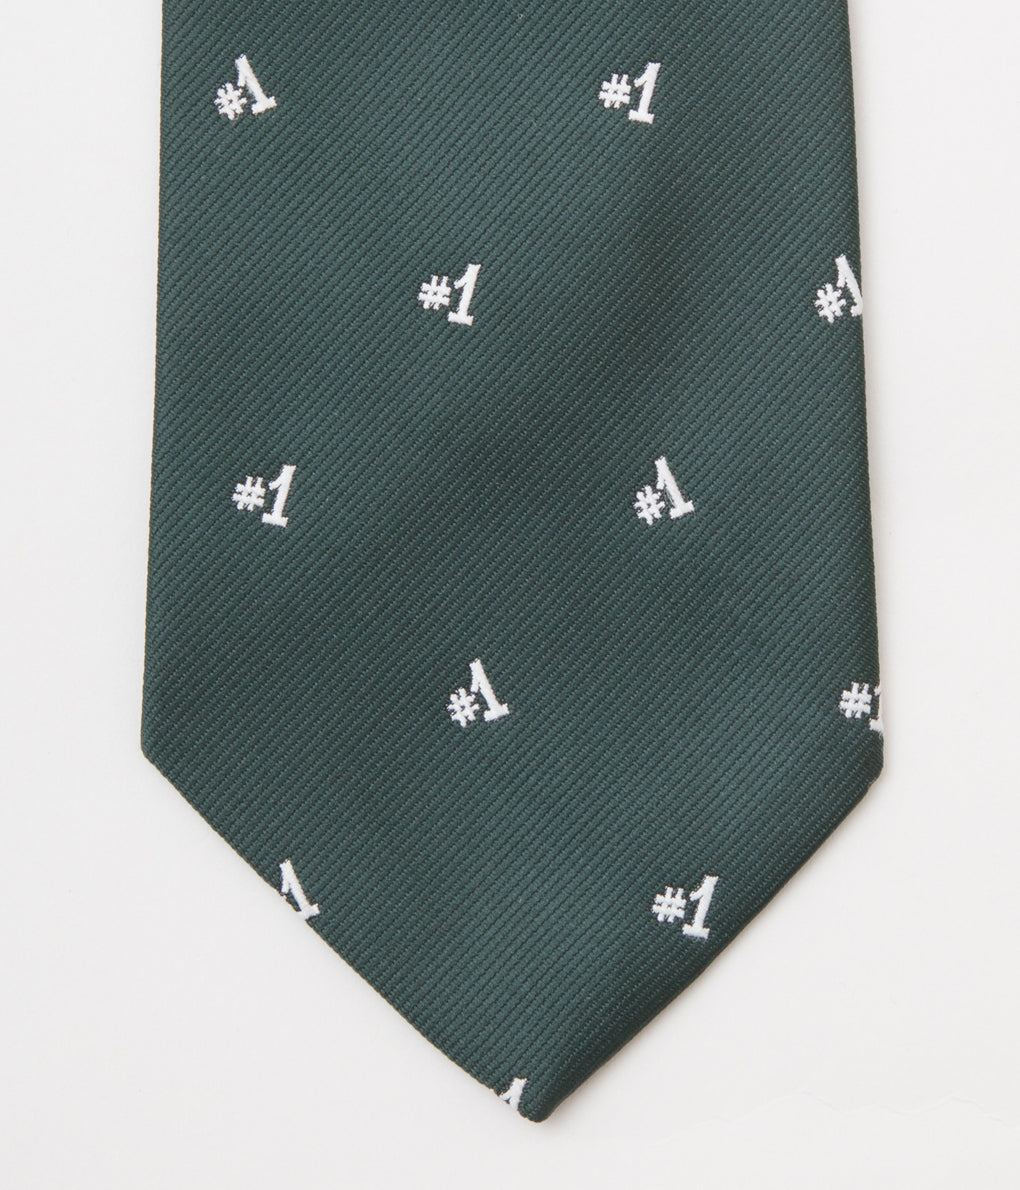 FROM USA "O'CONELL LUCAS-CHELF EMBROIDERED TIE #1"(GREEN)